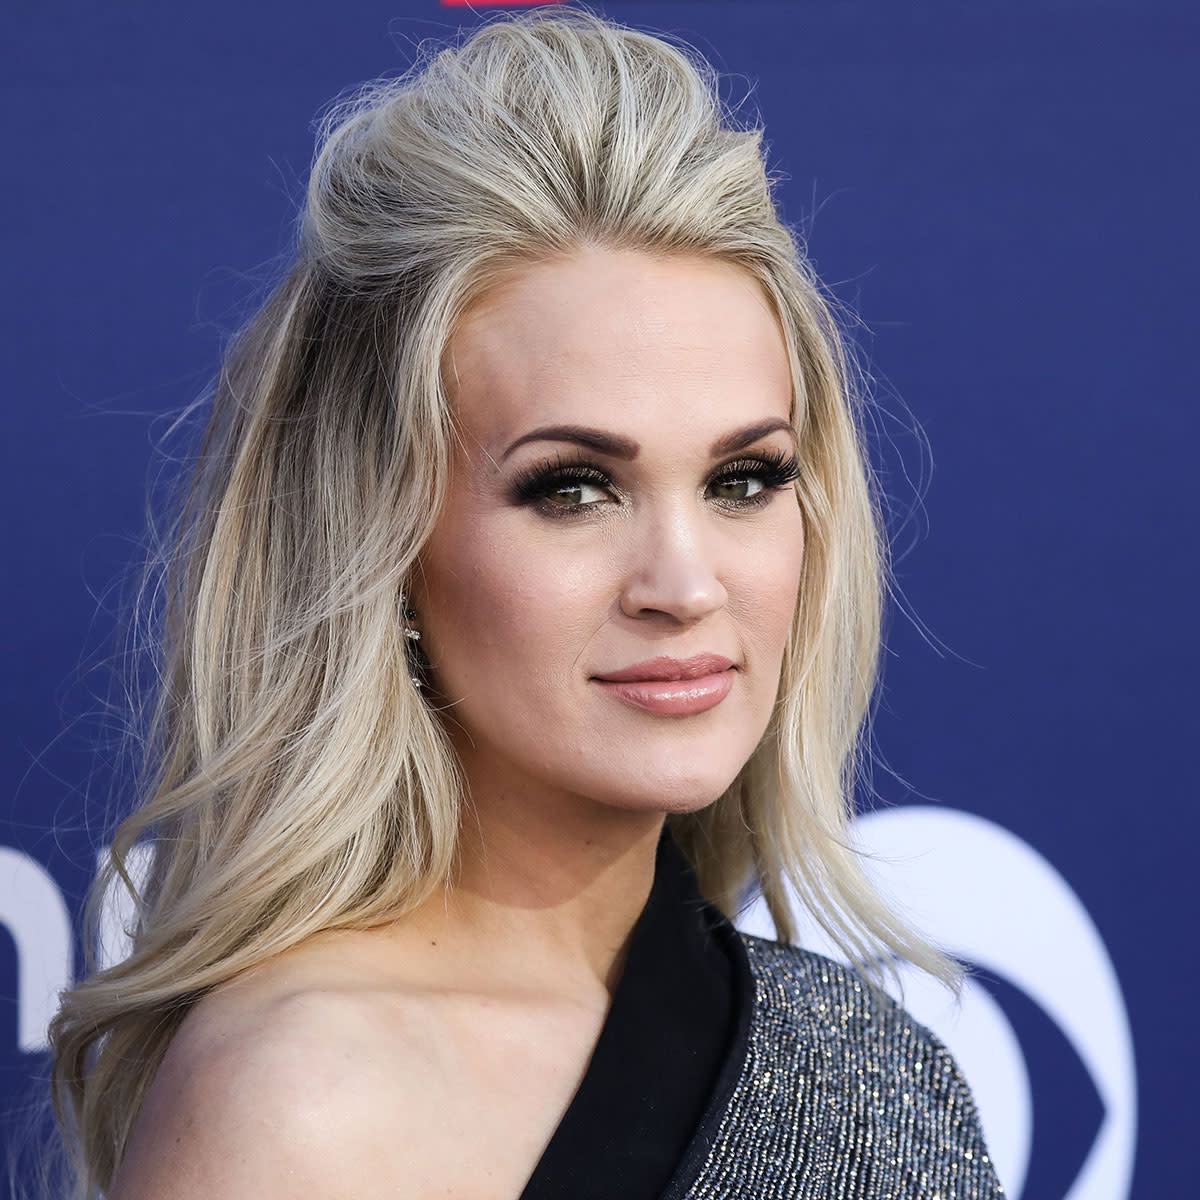 Carrie Underwood 54th Academy of Country Music Awards